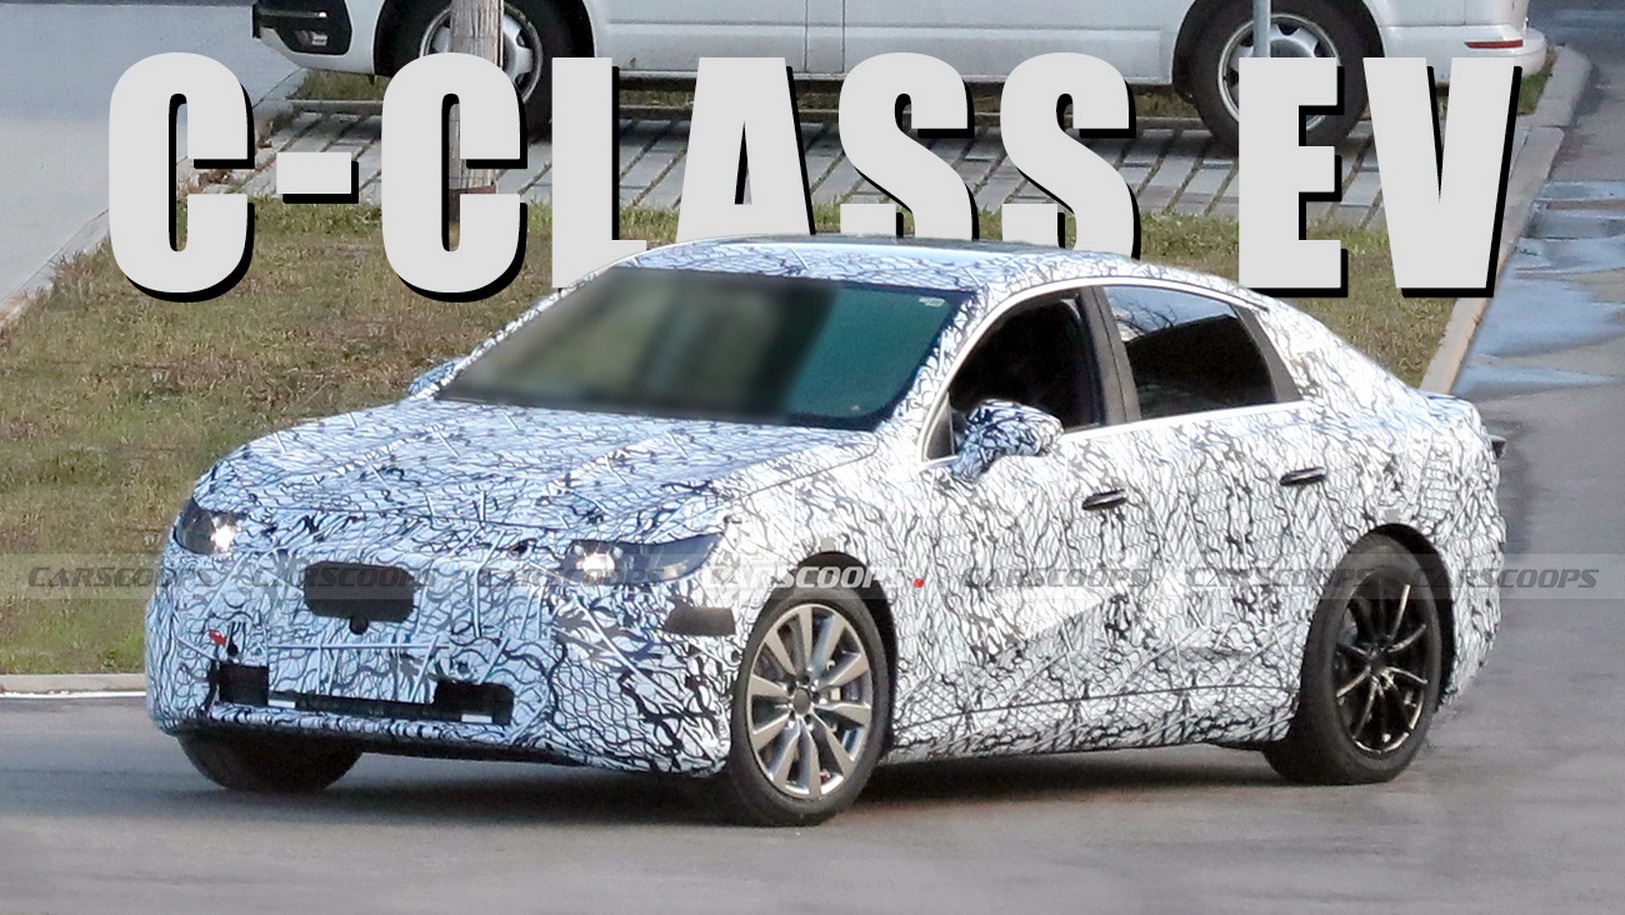 2026 Mercedes C-Class EV Spied For The First Time As It Takes Aim